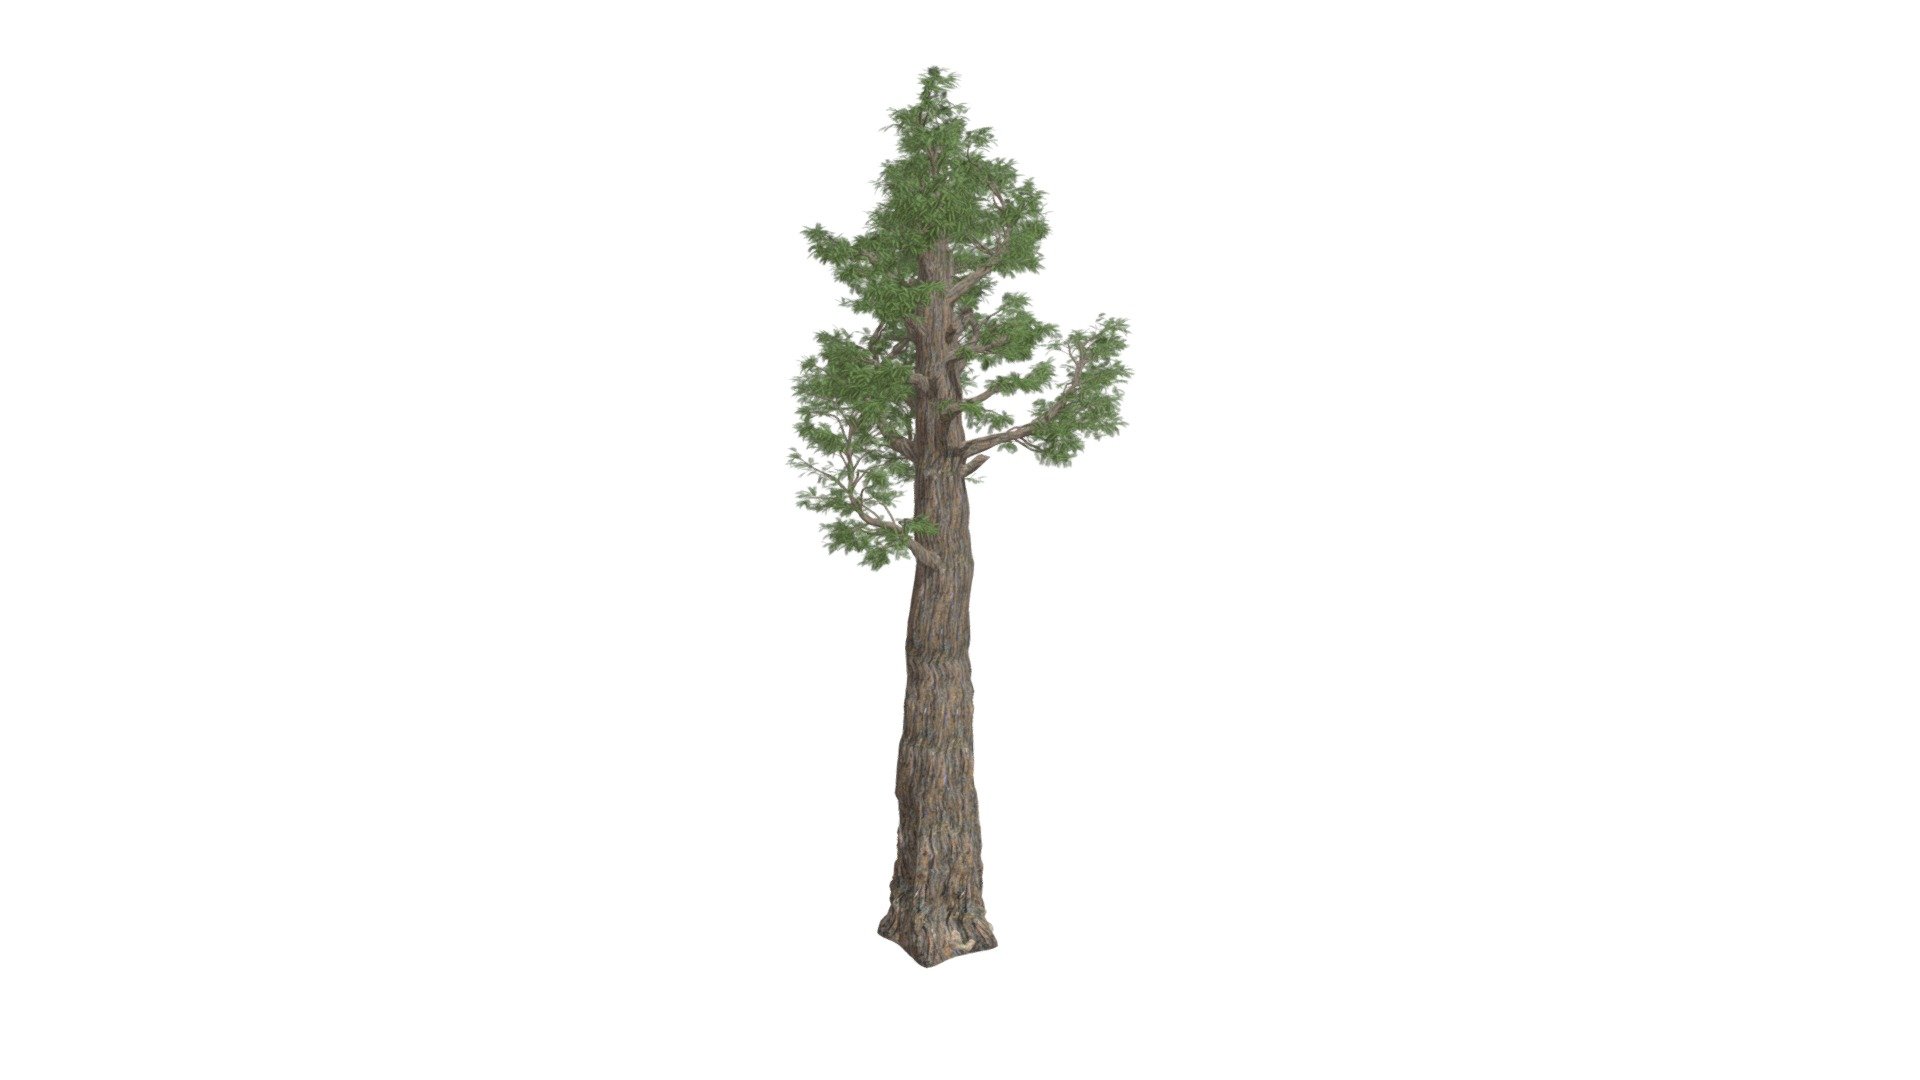 This 3D model of the Giant Redwood (Sequoia) Tree is a highly detailed and photorealistic option suitable for architectural, landscaping, and video game projects. The model is designed with carefully crafted textures that mimic the natural beauty of a real Giant Redwood (Sequoia) Tree. Its versatility allows it to bring a touch of realism to any project, whether it's a small architectural rendering or a large-scale landscape design. Additionally, the model is optimized for performance and features efficient UV mapping. This photorealistic 3D model is the perfect solution for architects, landscapers, and game developers who want to enhance the visual experience of their project with a highly detailed, photorealistic Giant Redwood (Sequoia) Tree 3d model